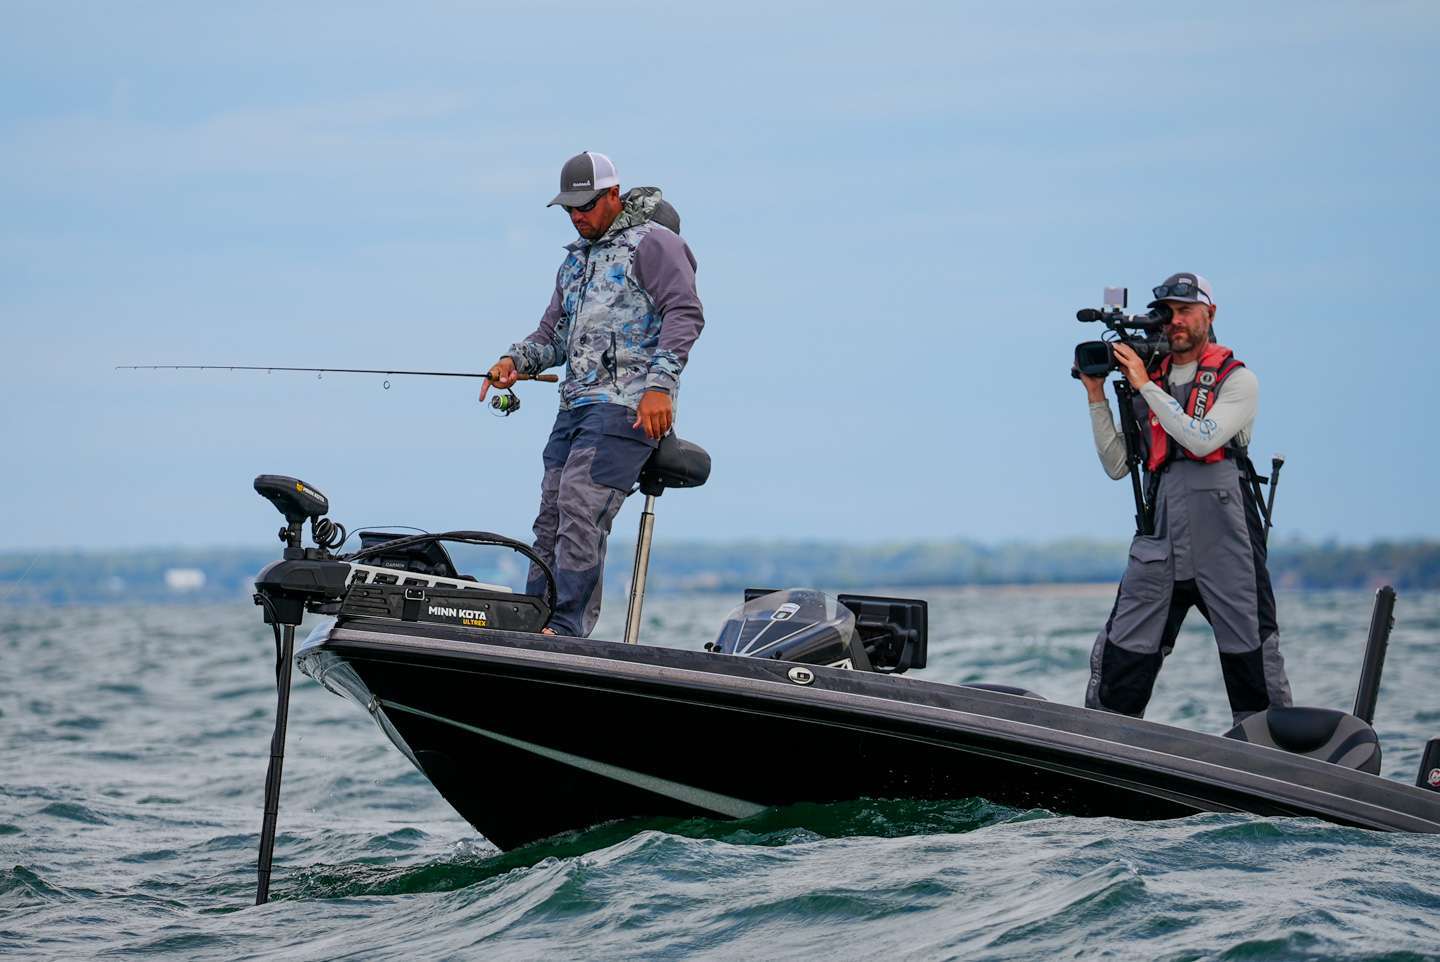 Cory Johnston hunted down big smallmouth on both sides of the field, scoring his best weights in Lake Ontario. On Championship Saturday, his 27-6 limit secured the win with a weight of 78-0. 
